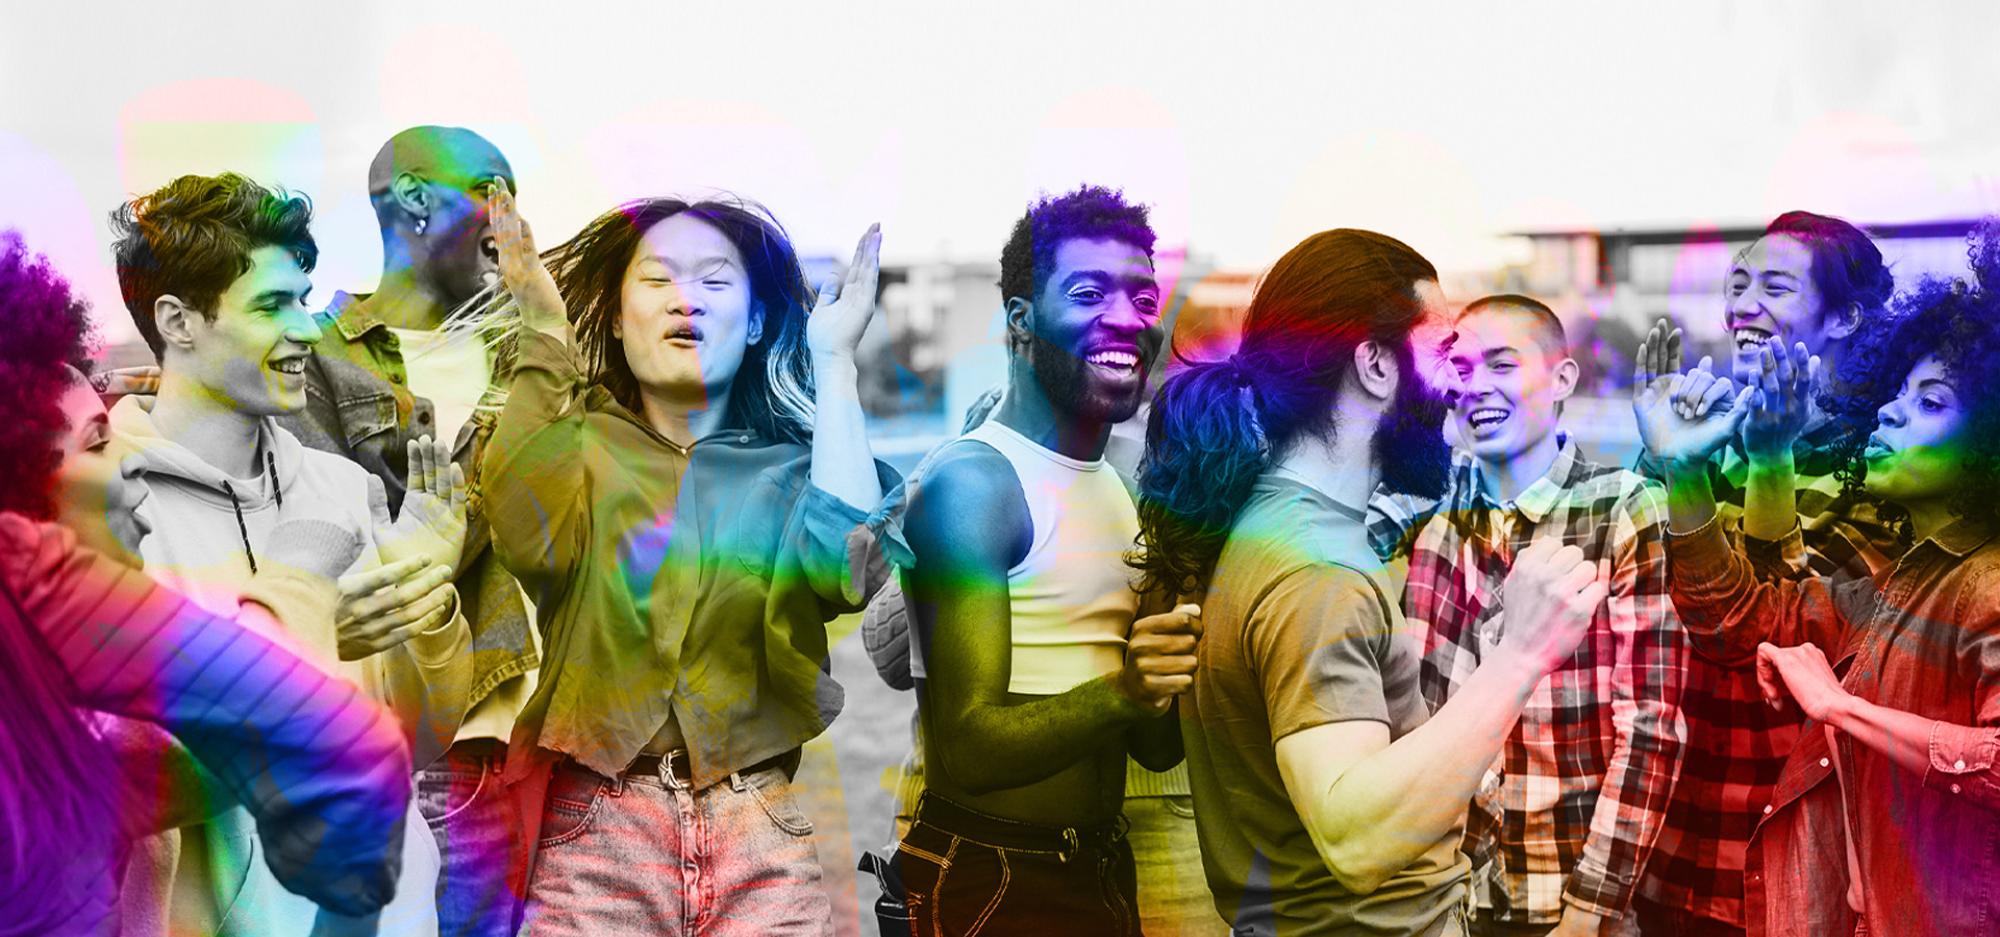 A diverse group of young people having fun dancing outdoors, with a focus on the bearded man's face. The image is black and white but has colourful accents